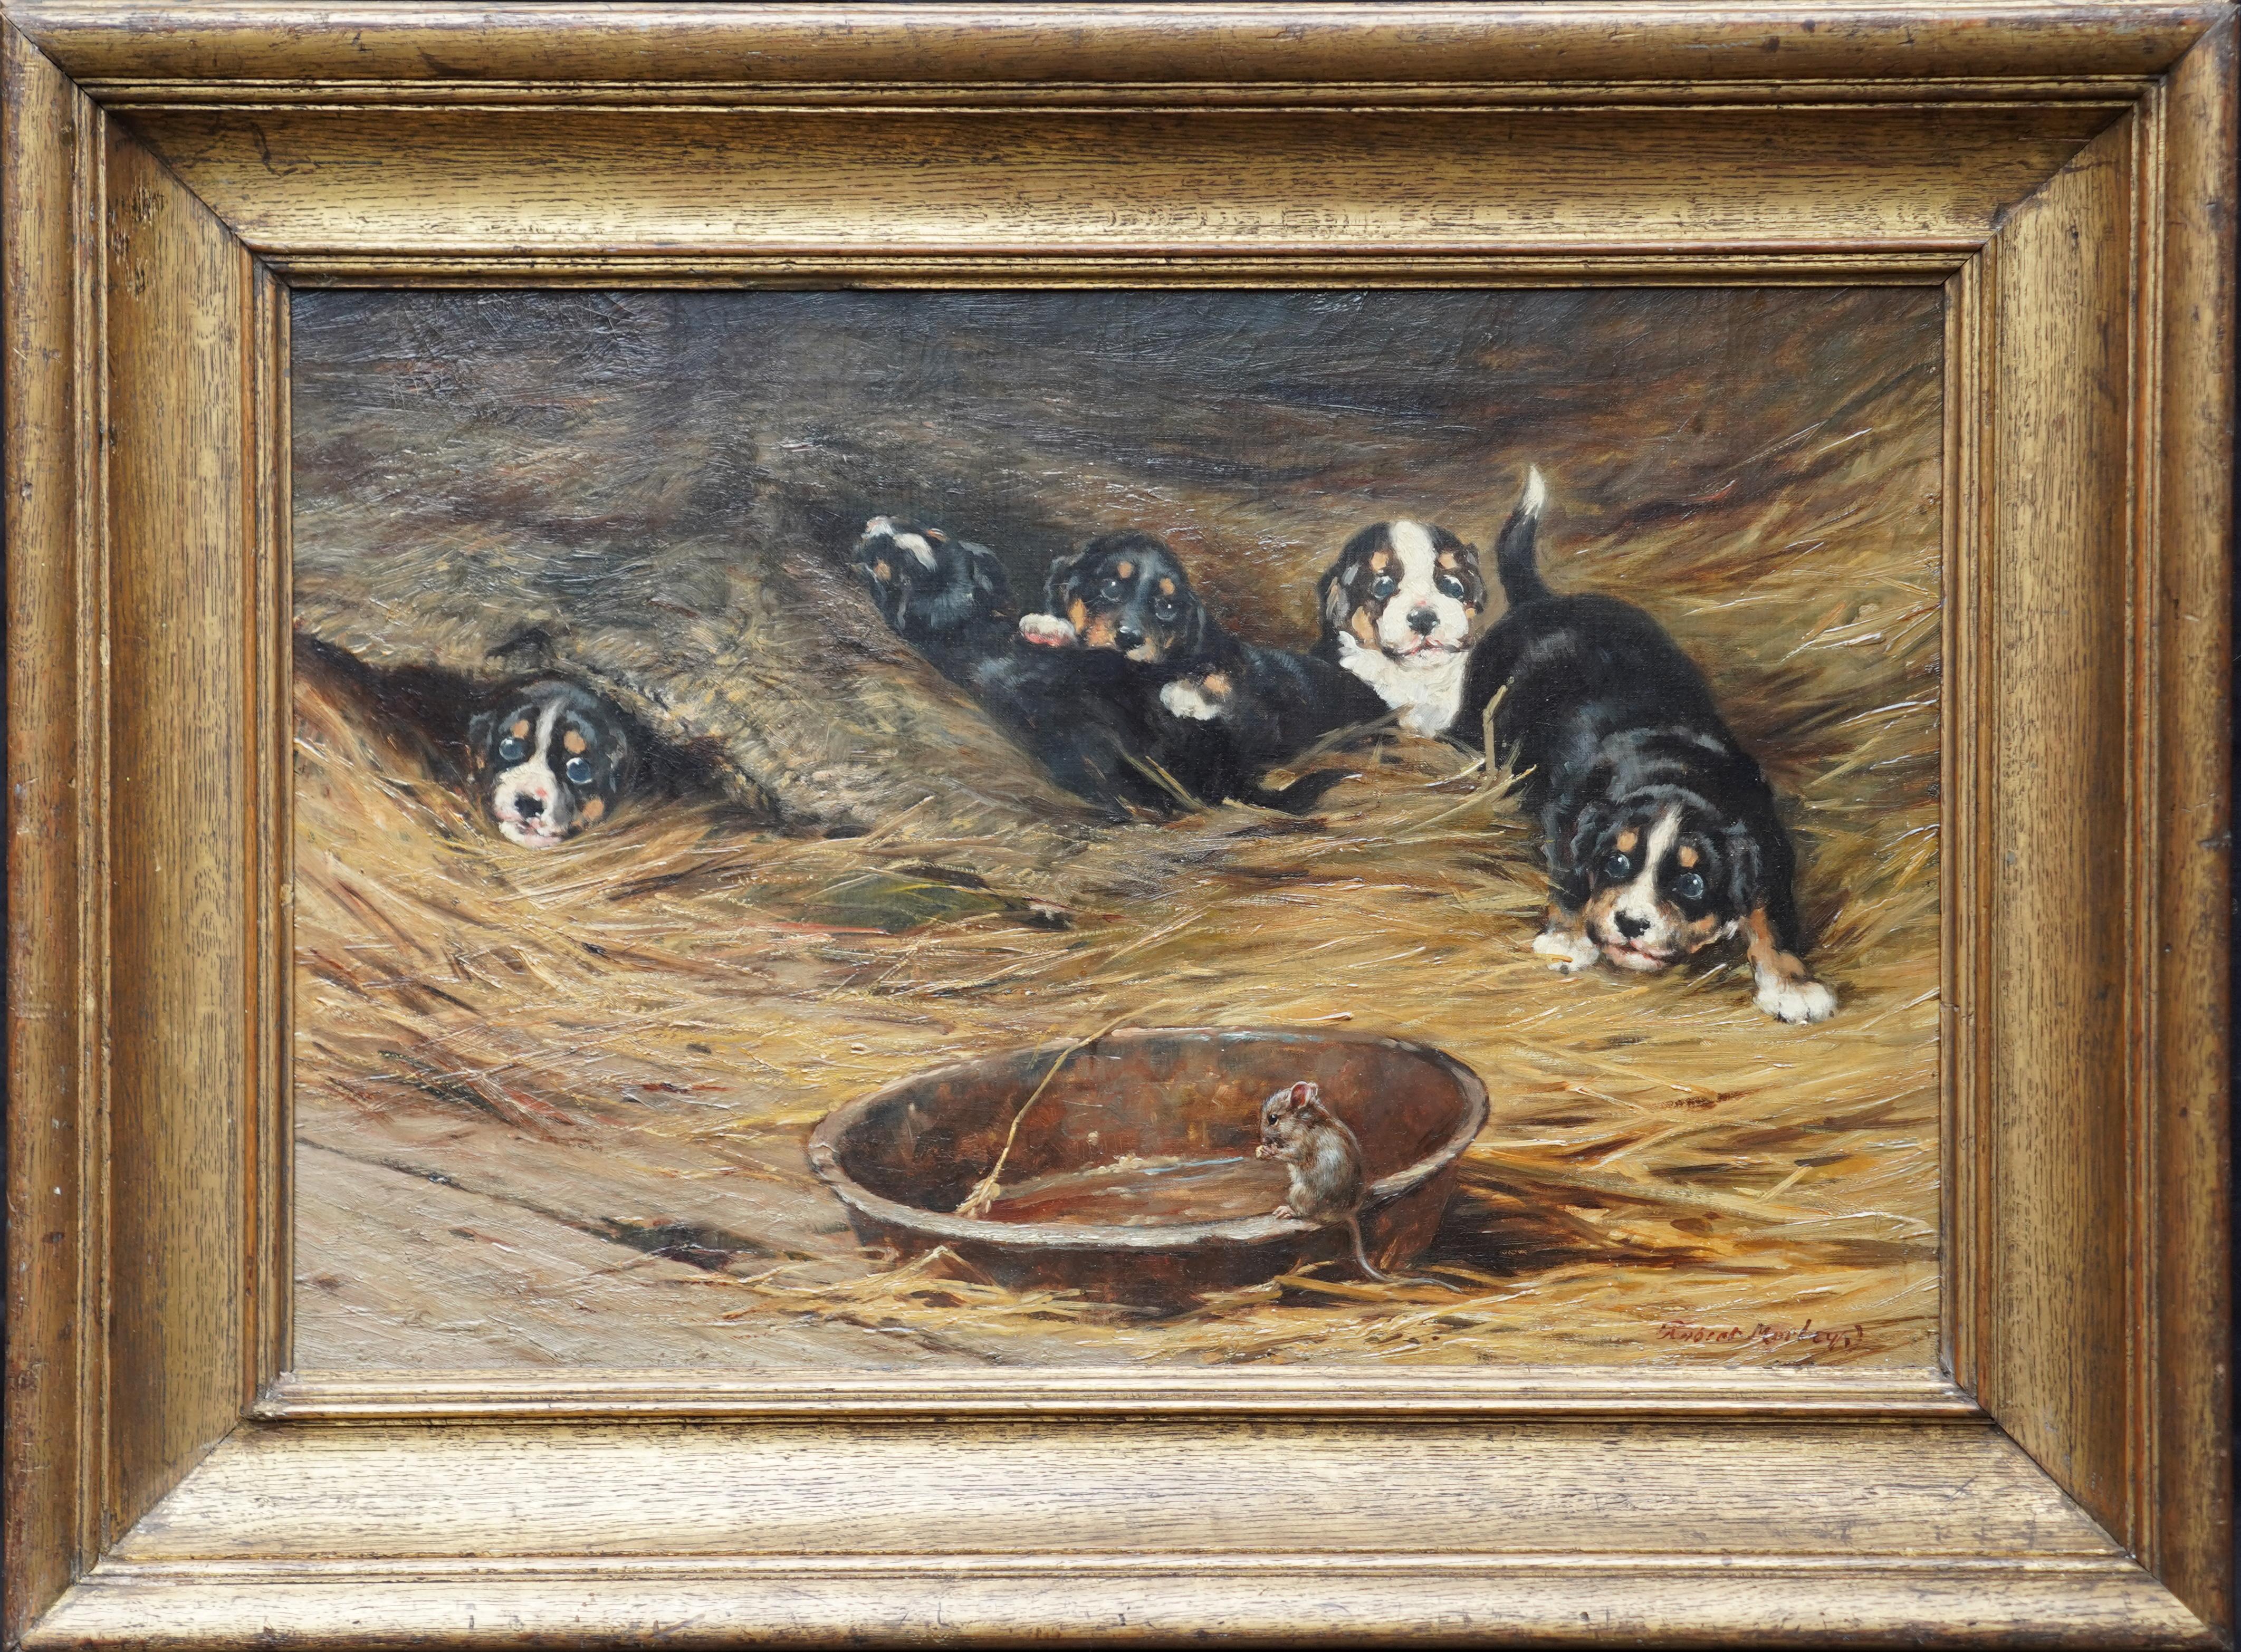 Robert Morley Animal Painting - Mouse with Spaniel Puppies - British Edwardian art dog portrait oil painting